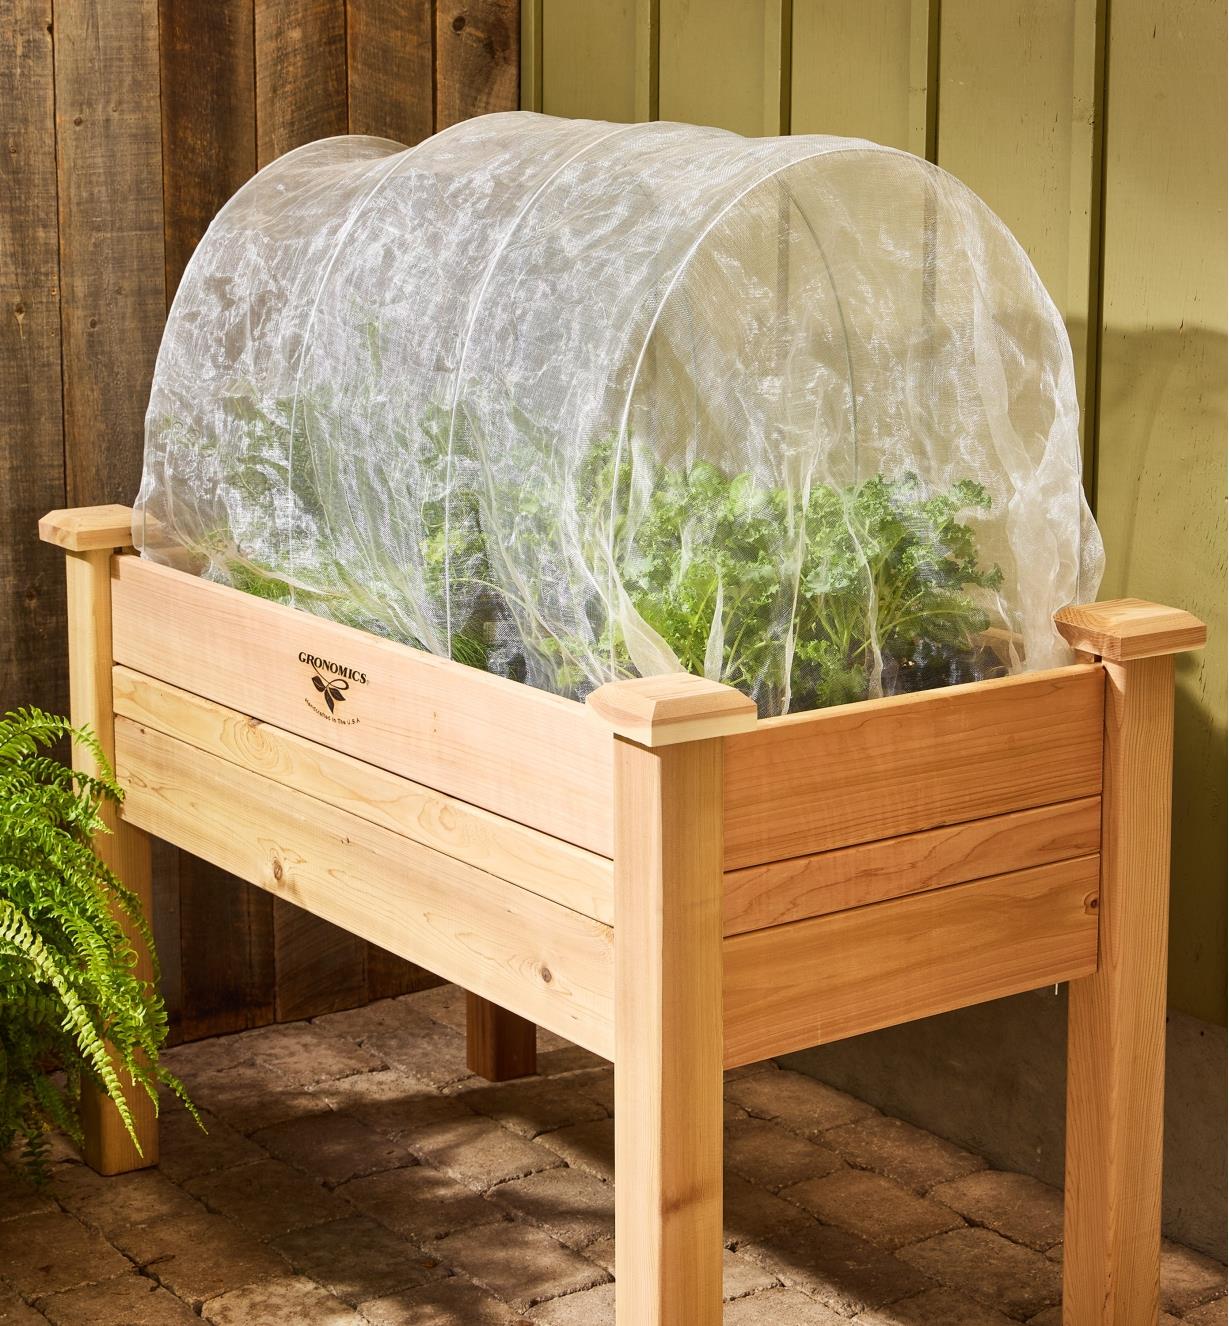 Insect protection fabric and garden hoops covering plants in a raised planter